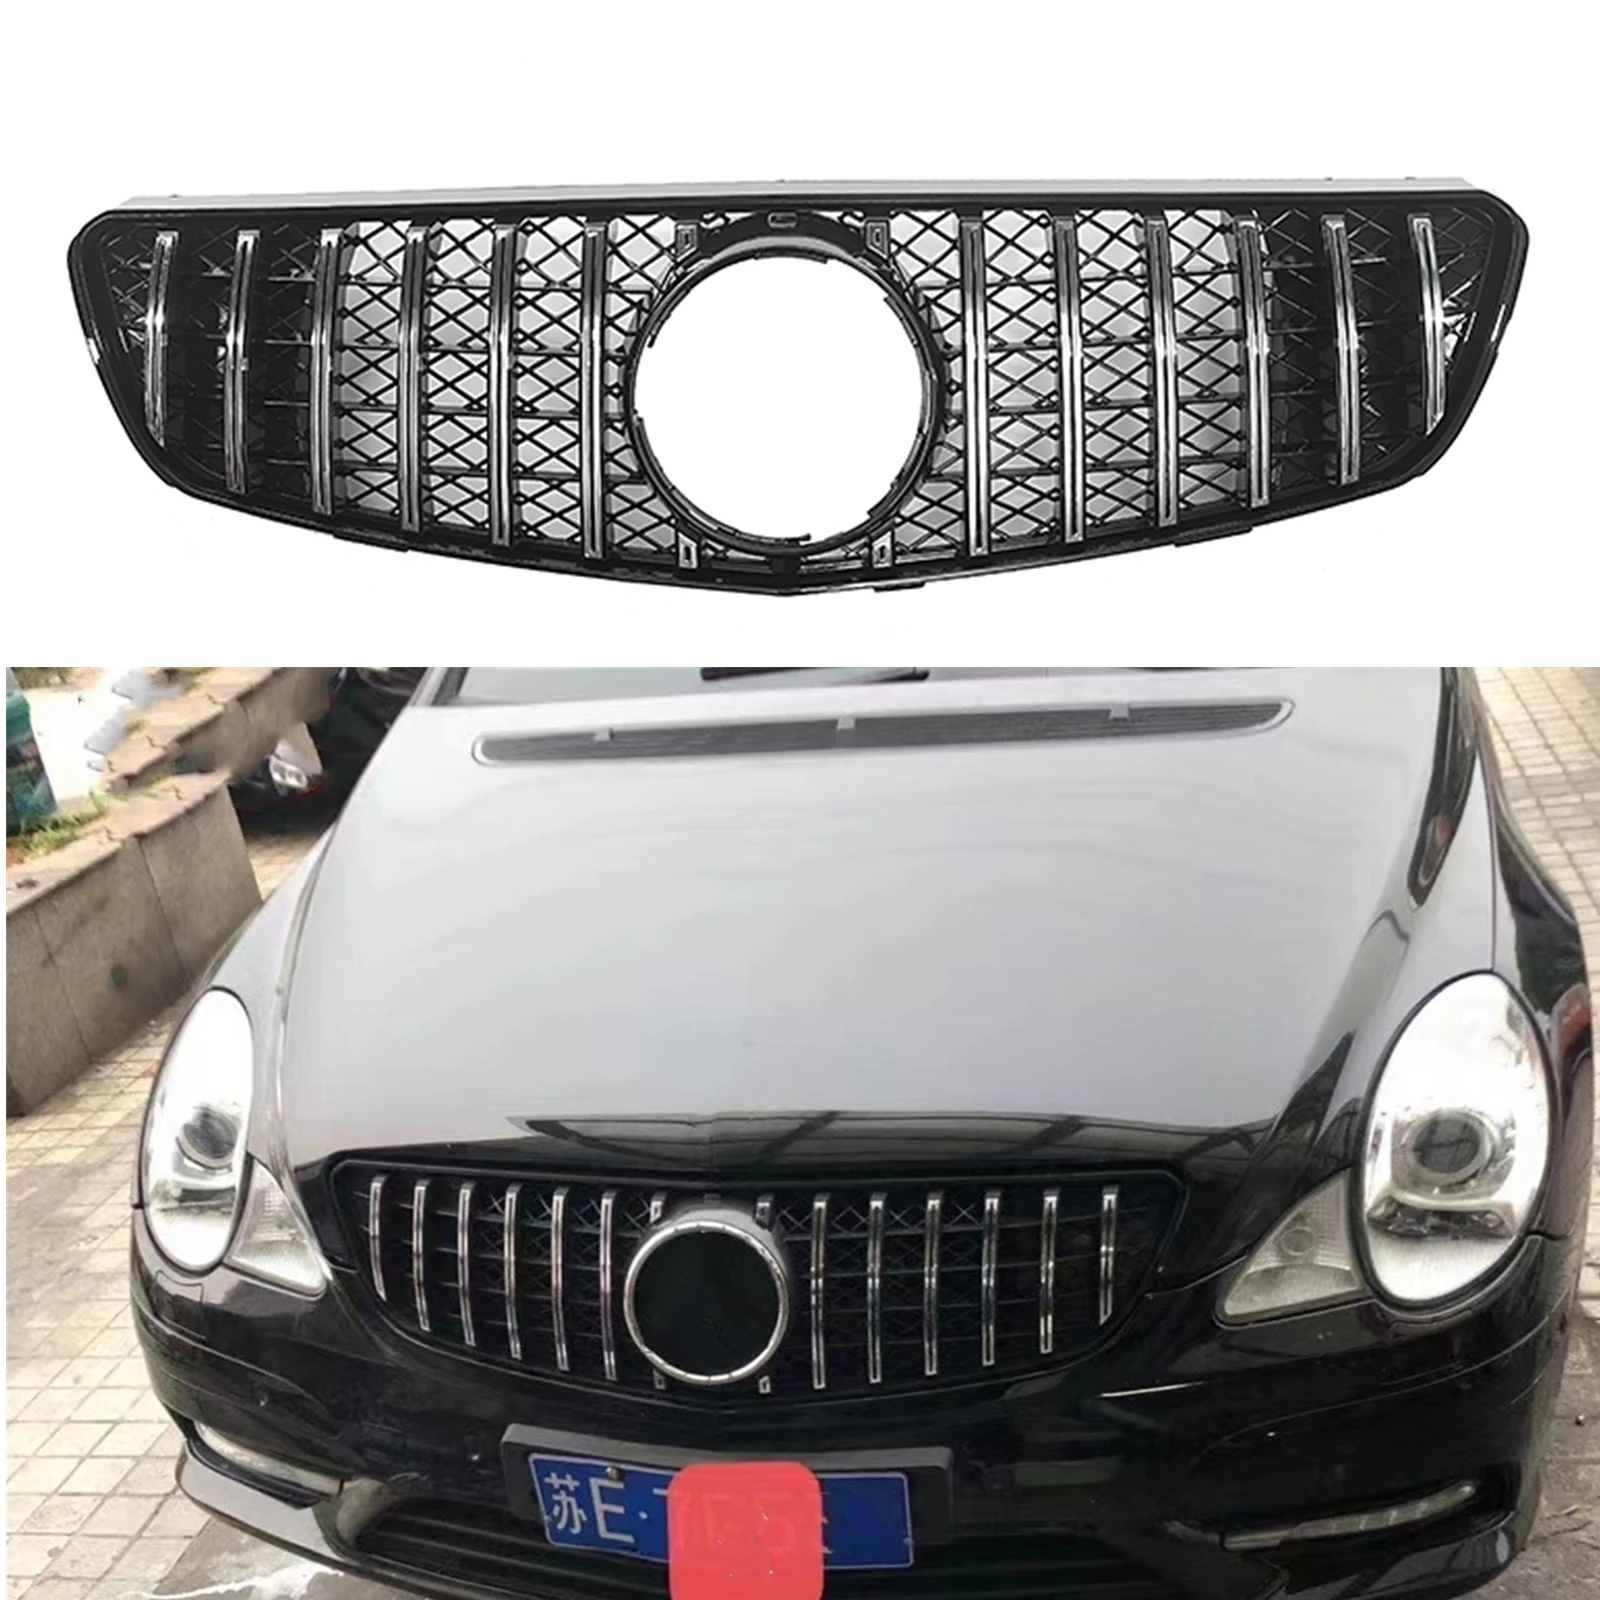 

Front Grille Grill For Mercedes-Benz R-Class W250 GT-R 2005-2010 R320 R350 R500 R550 GT Style Silver Car Upper Bumper Hood Mesh